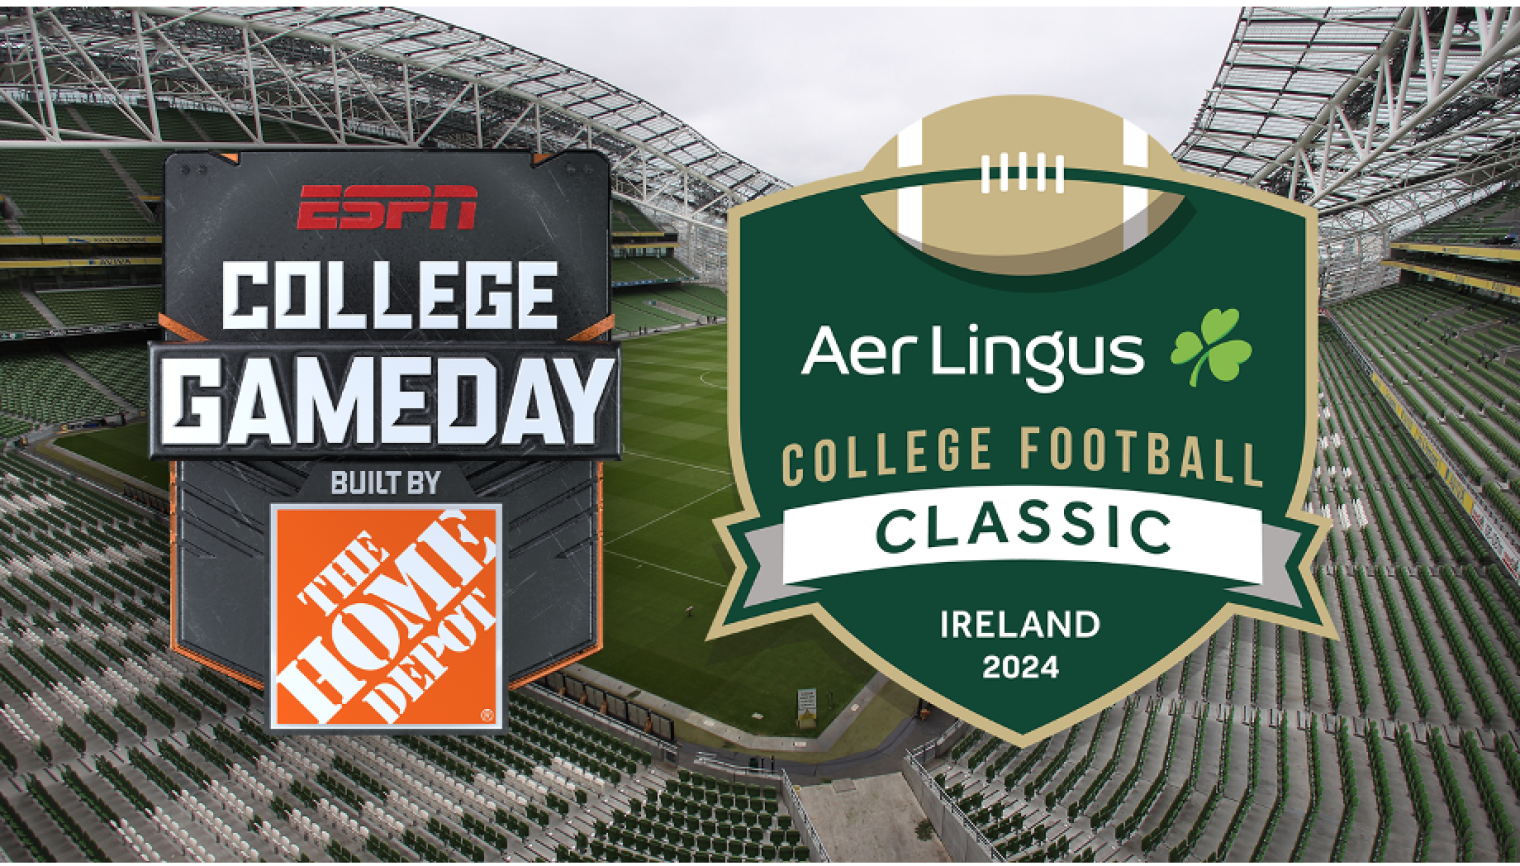 ESPN’s <em>College GameDay</em> Built by The Home Depot to Kick Off 2024 Season in Dublin at Aer Lingus Classic